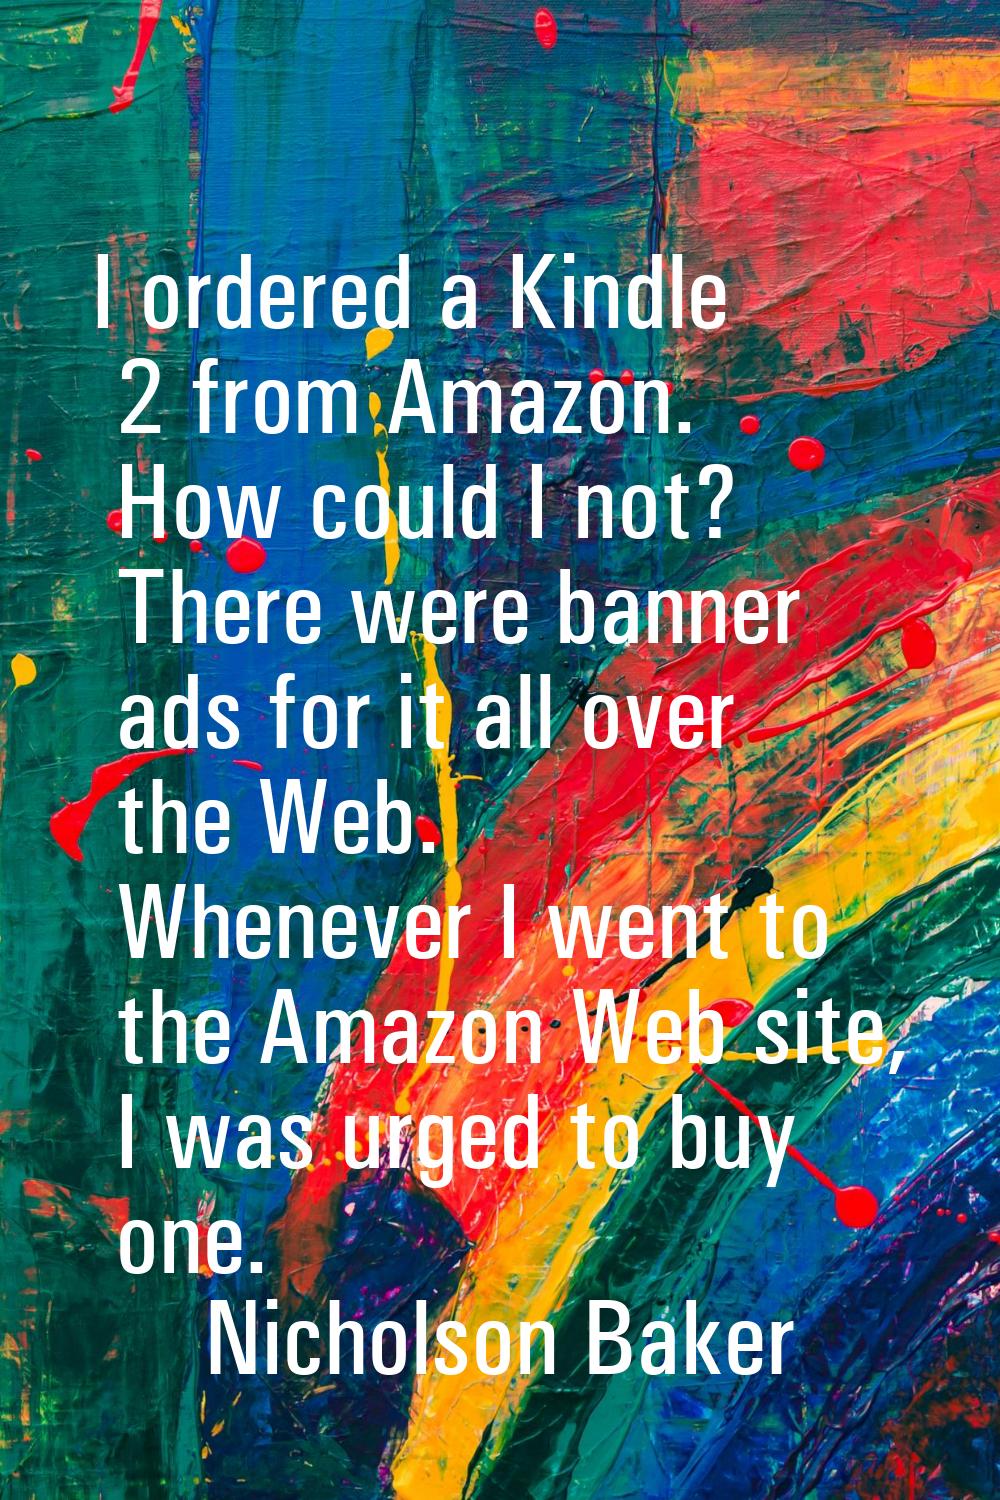 I ordered a Kindle 2 from Amazon. How could I not? There were banner ads for it all over the Web. W